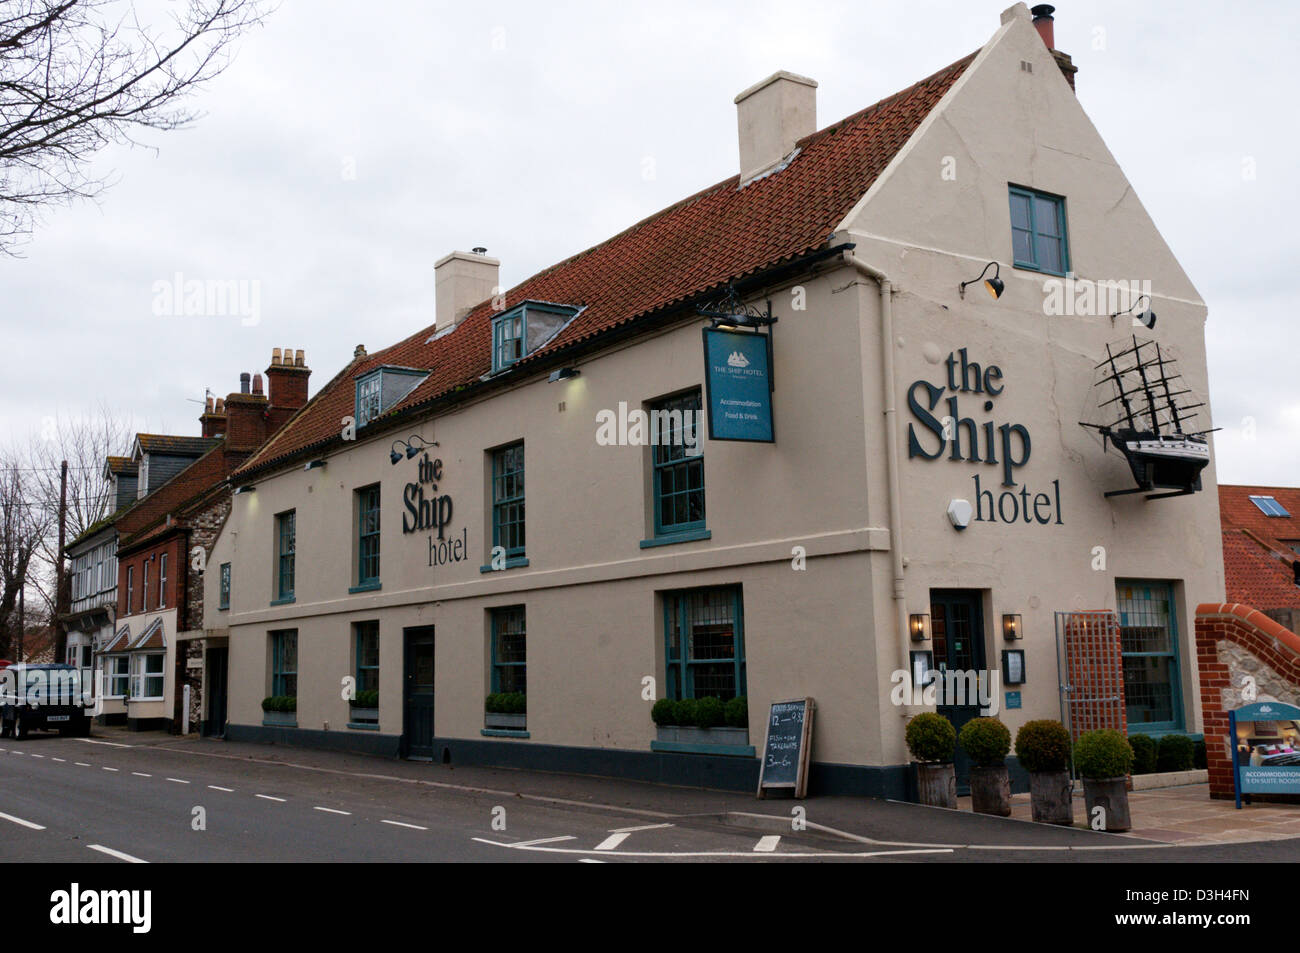 The Ship Hotel at Brancaster on the North Norfolk coast, England Stock Photo